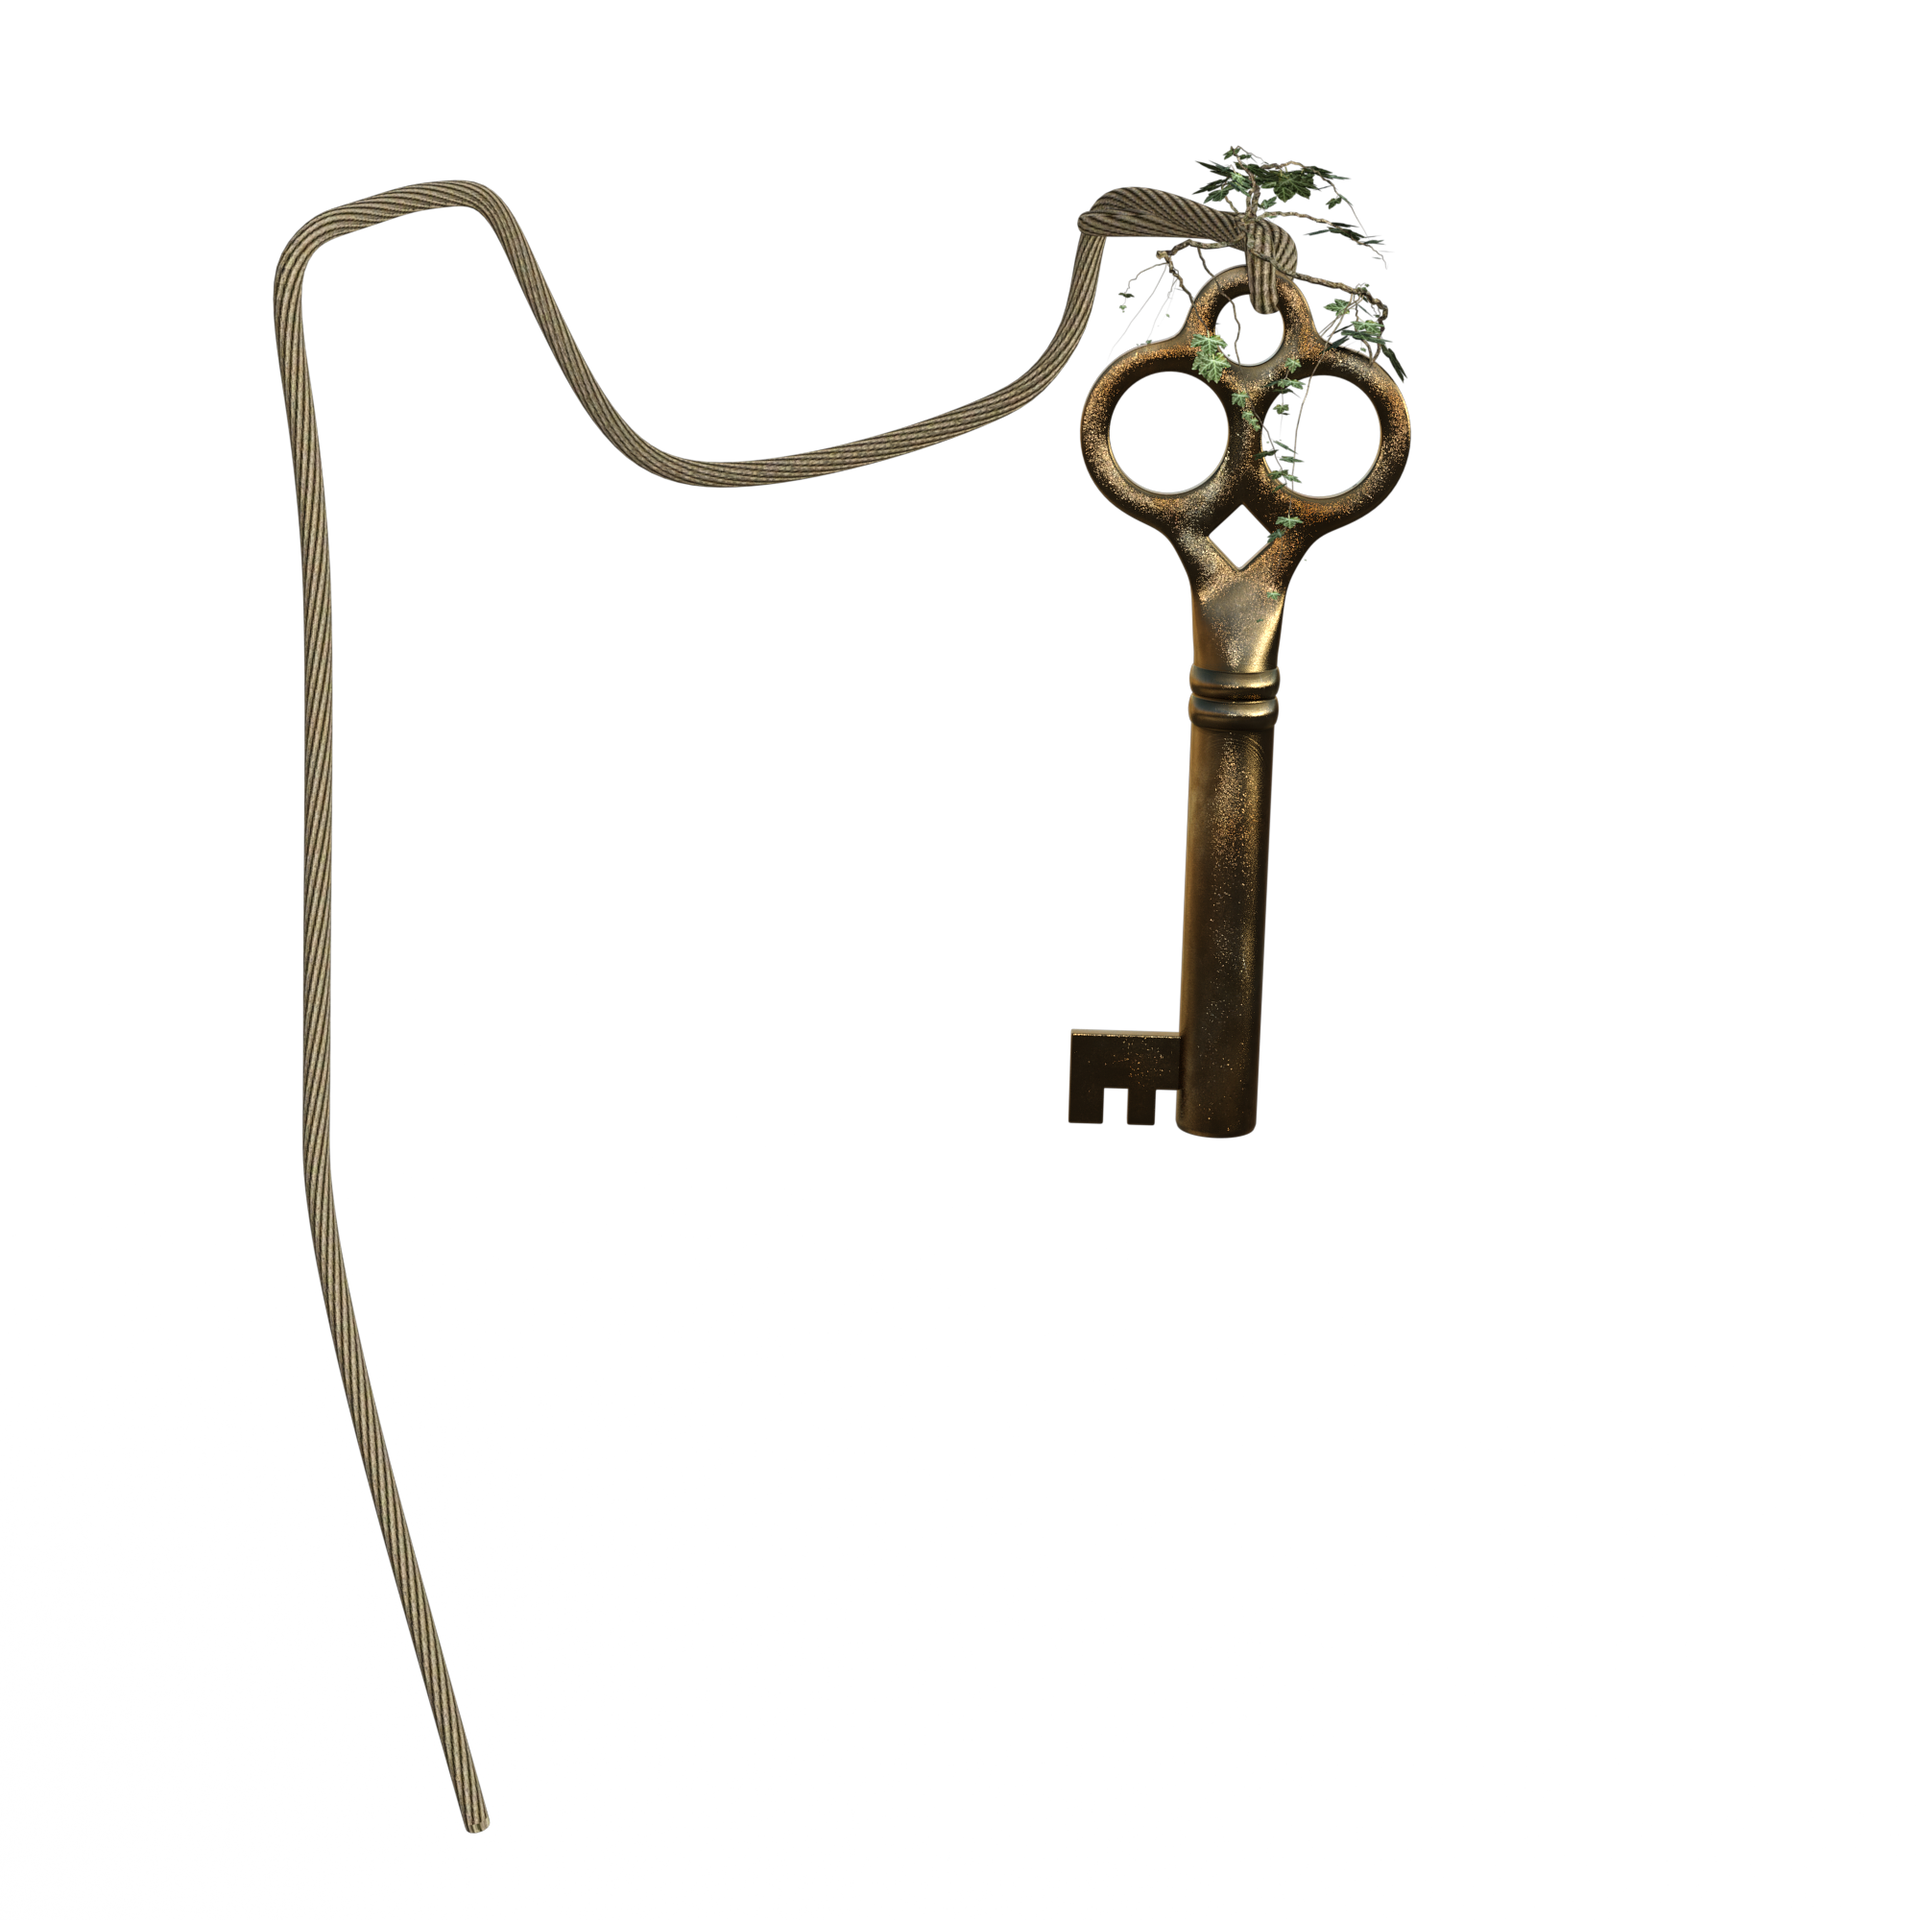 Golden key on a chain